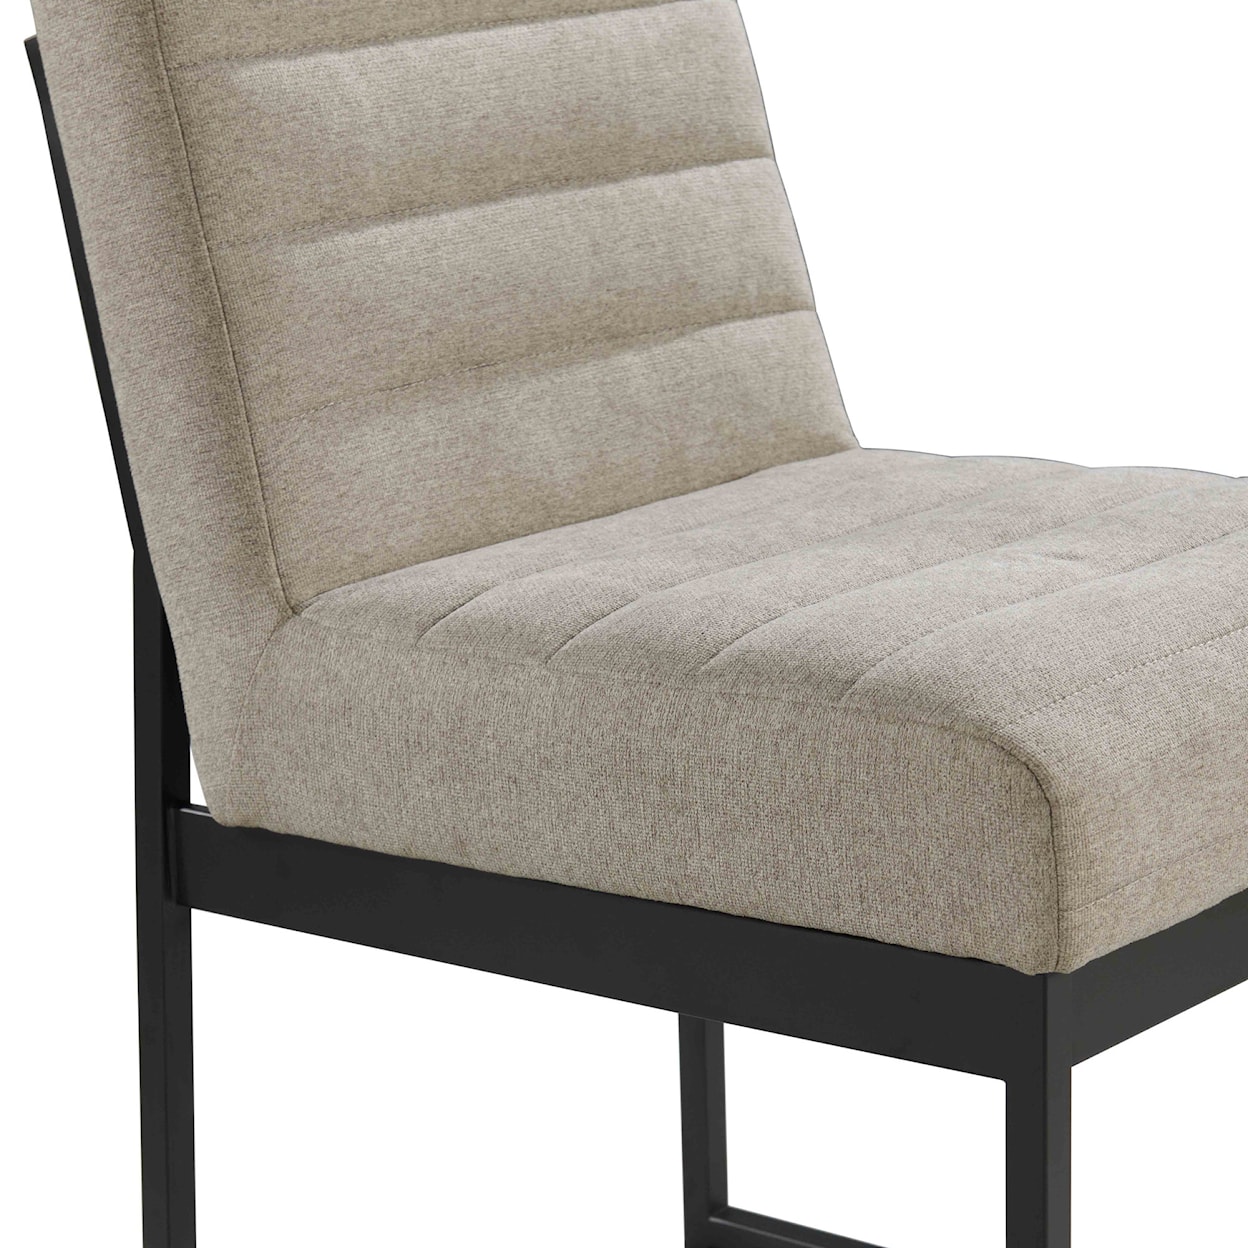 Intercon Eden Upholstered Dining Side Chair